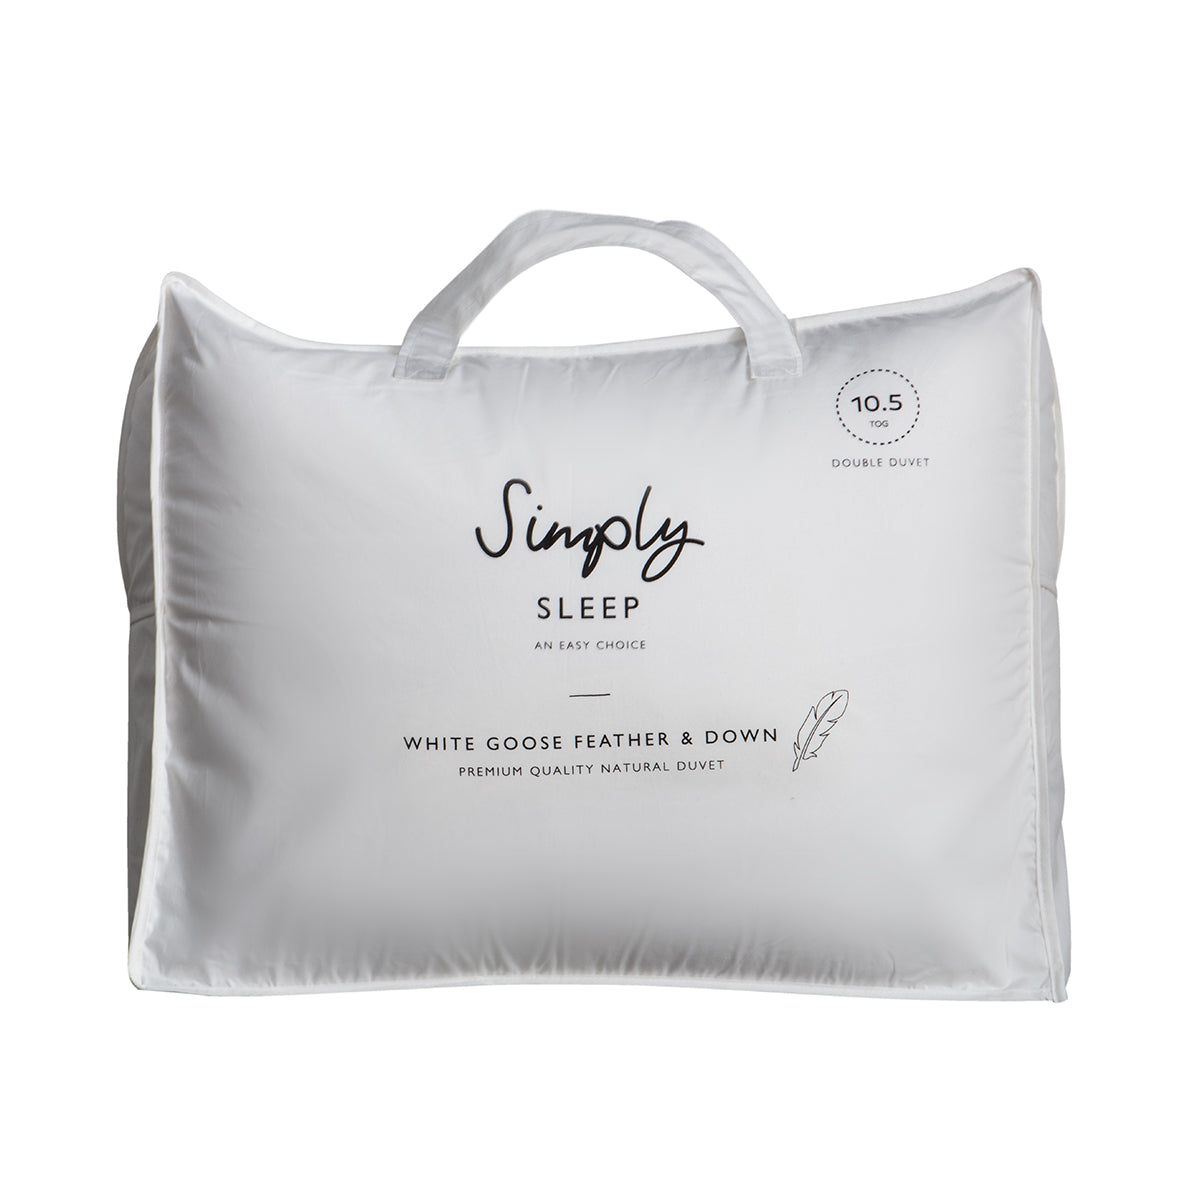 SS White Goose Feather & Down King Duvet 10.5 tog